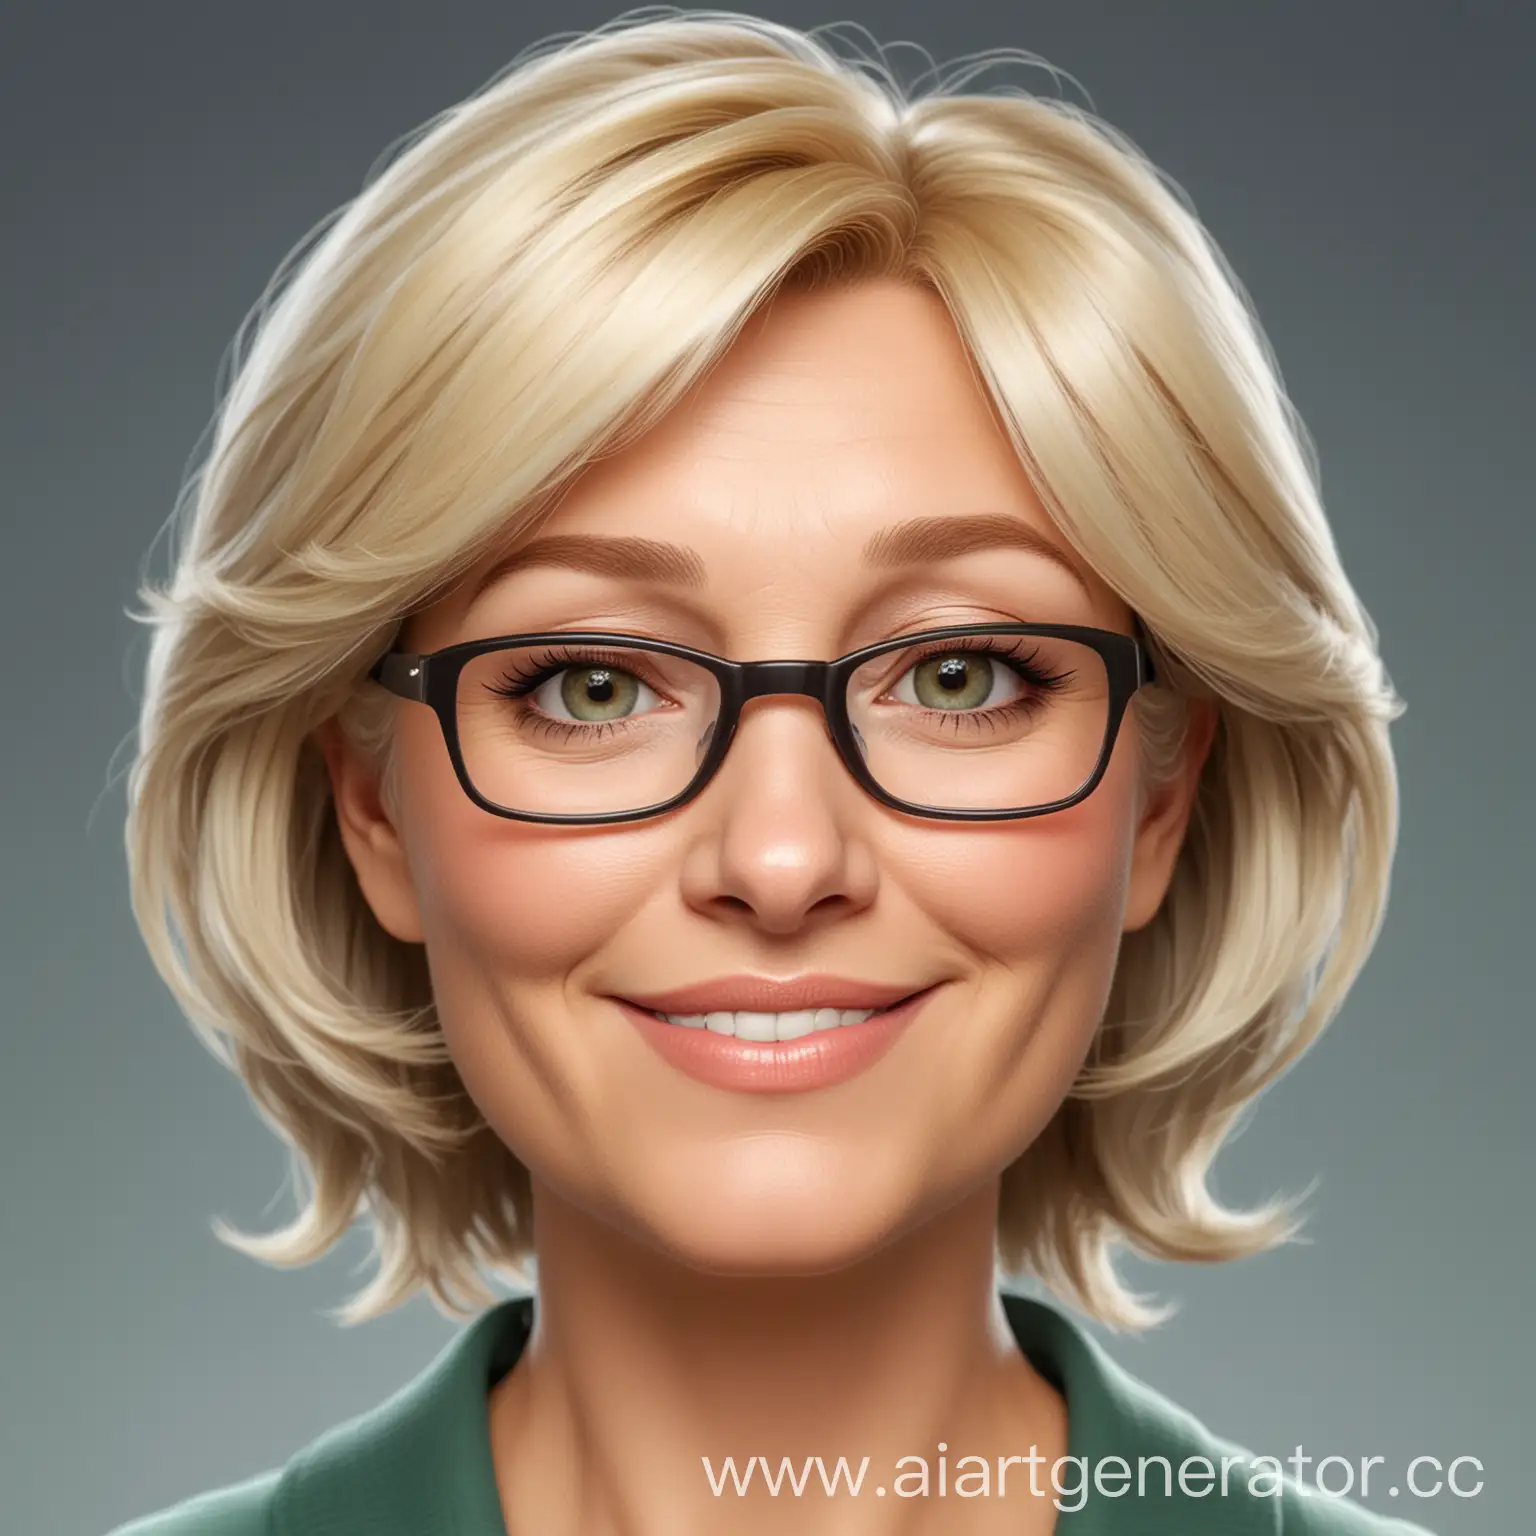 Sweet-and-Confident-Cartoon-Avatar-Cheerful-55YearOld-Blonde-Woman-with-Elegant-Glasses